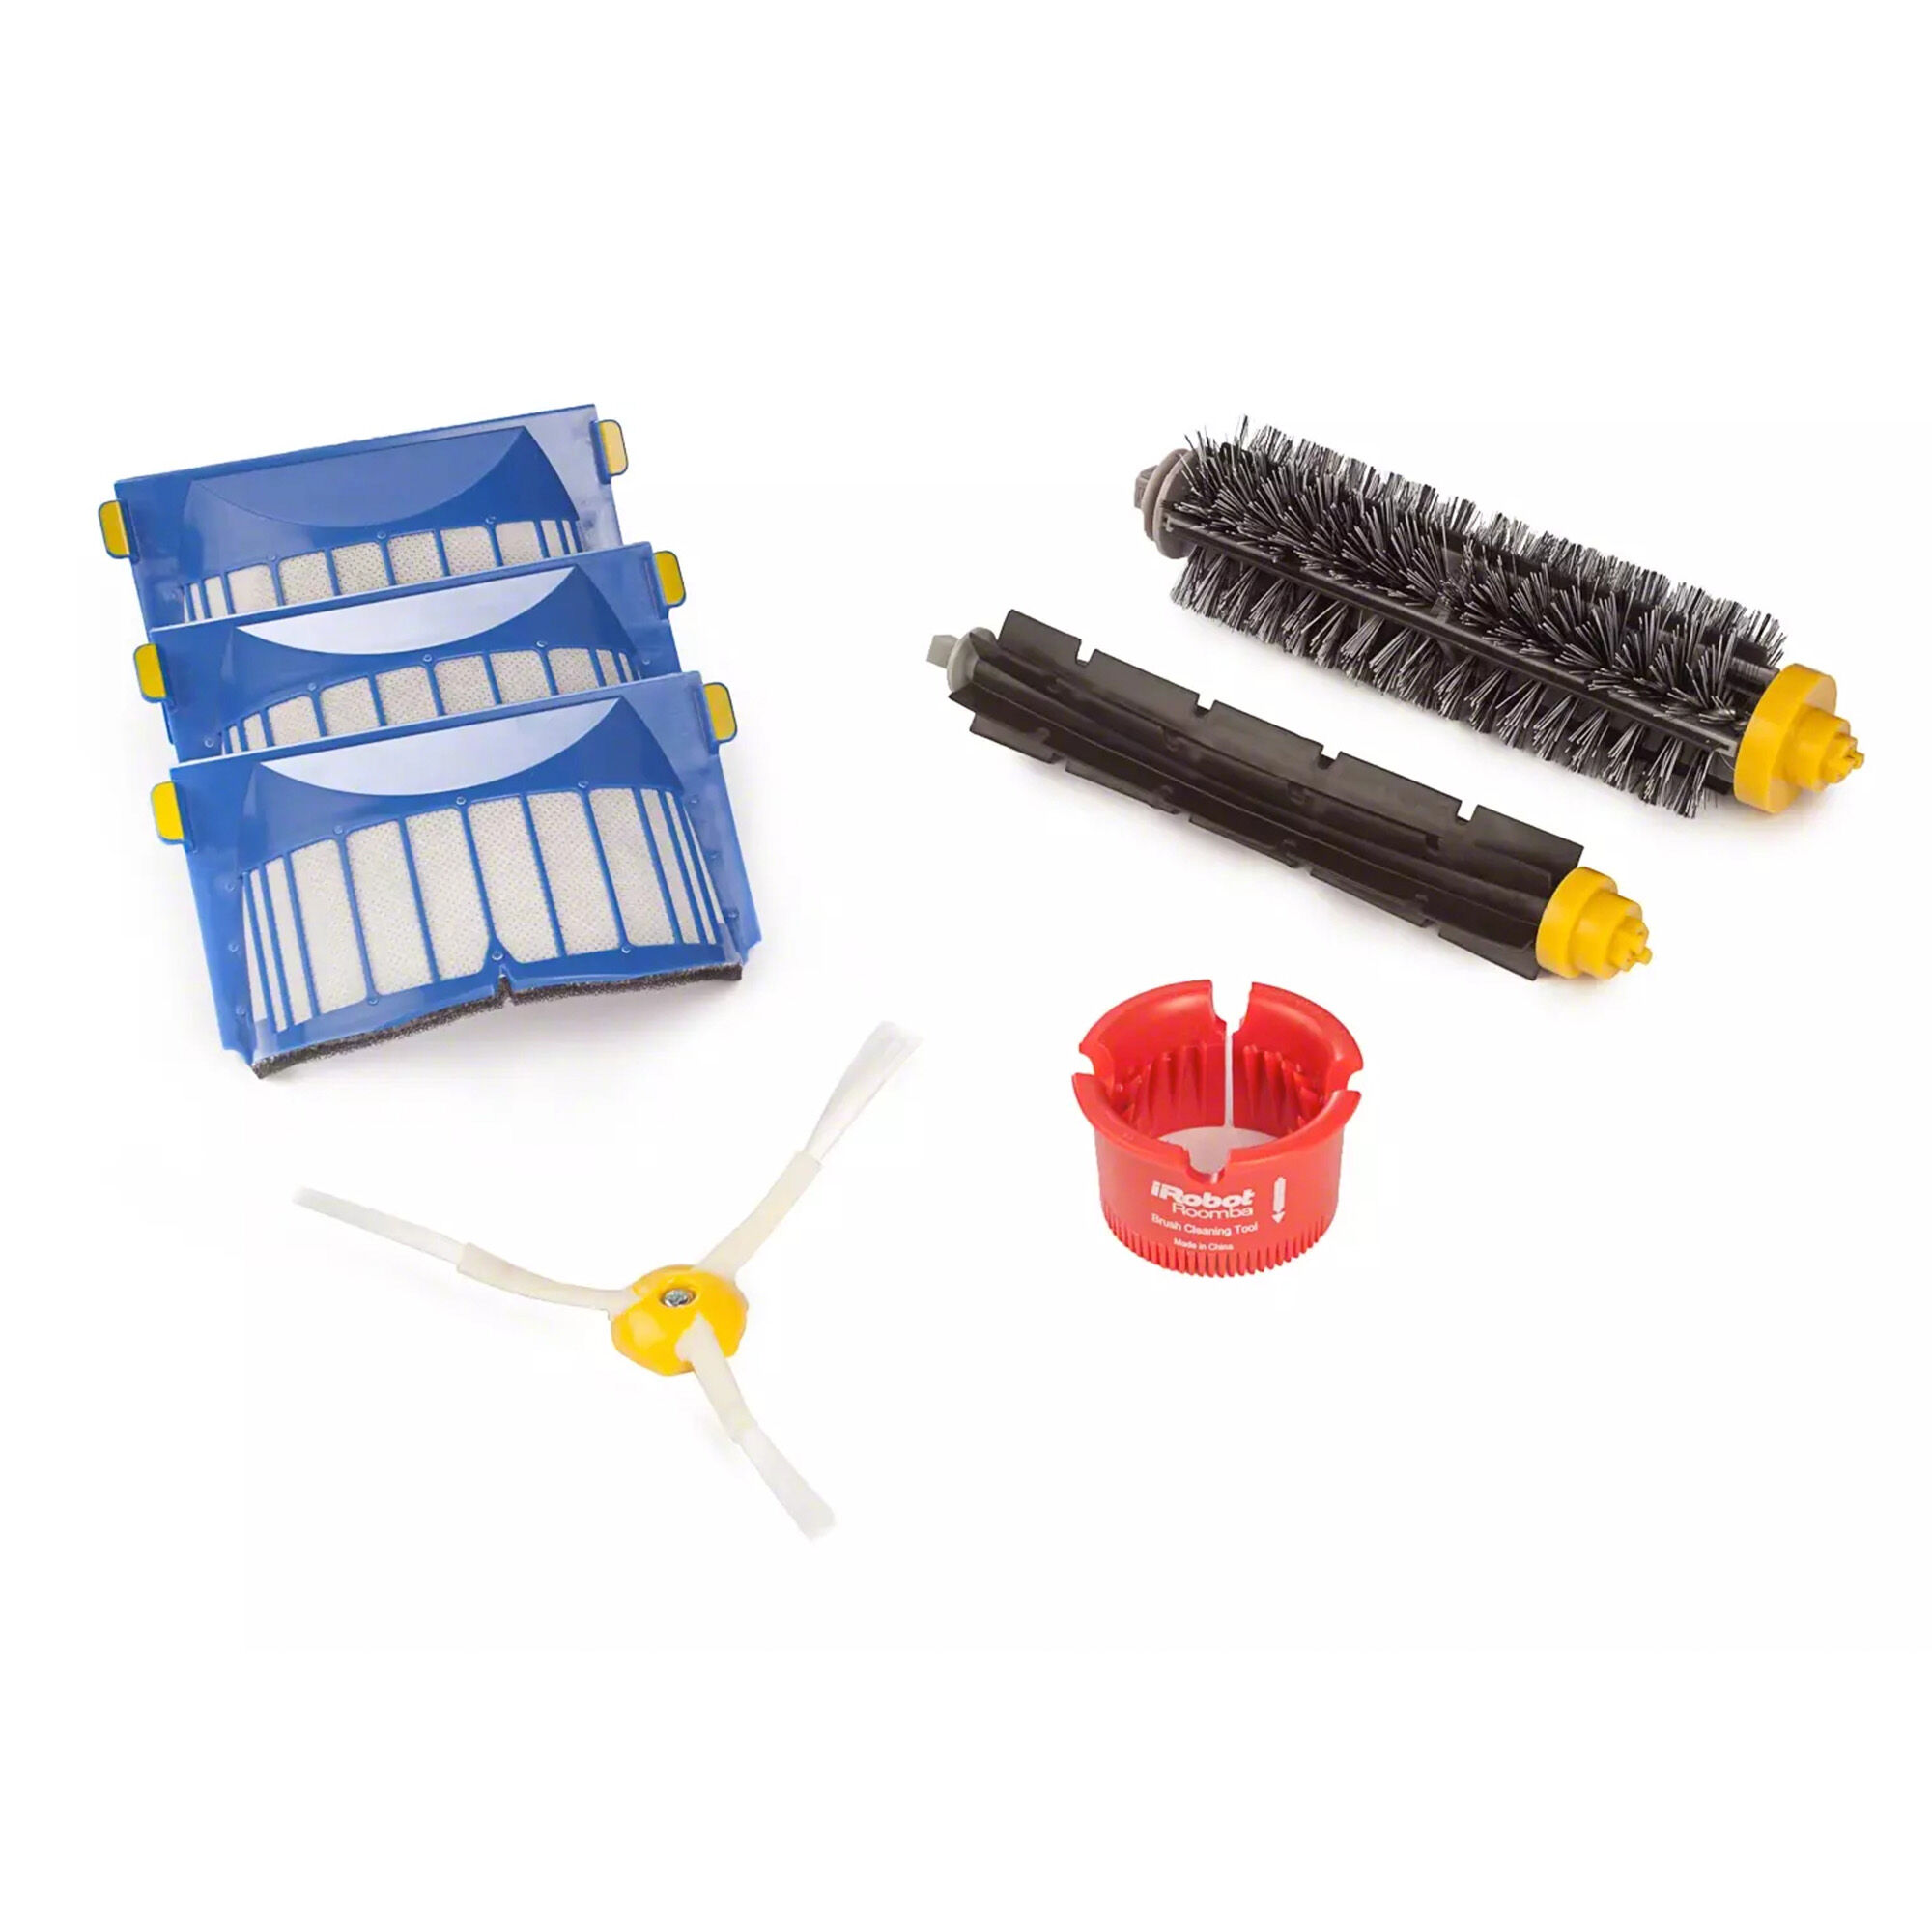 New Robot Roomba 600 Series Replenishment Kit Brush Filter Home Cleaning Tool 